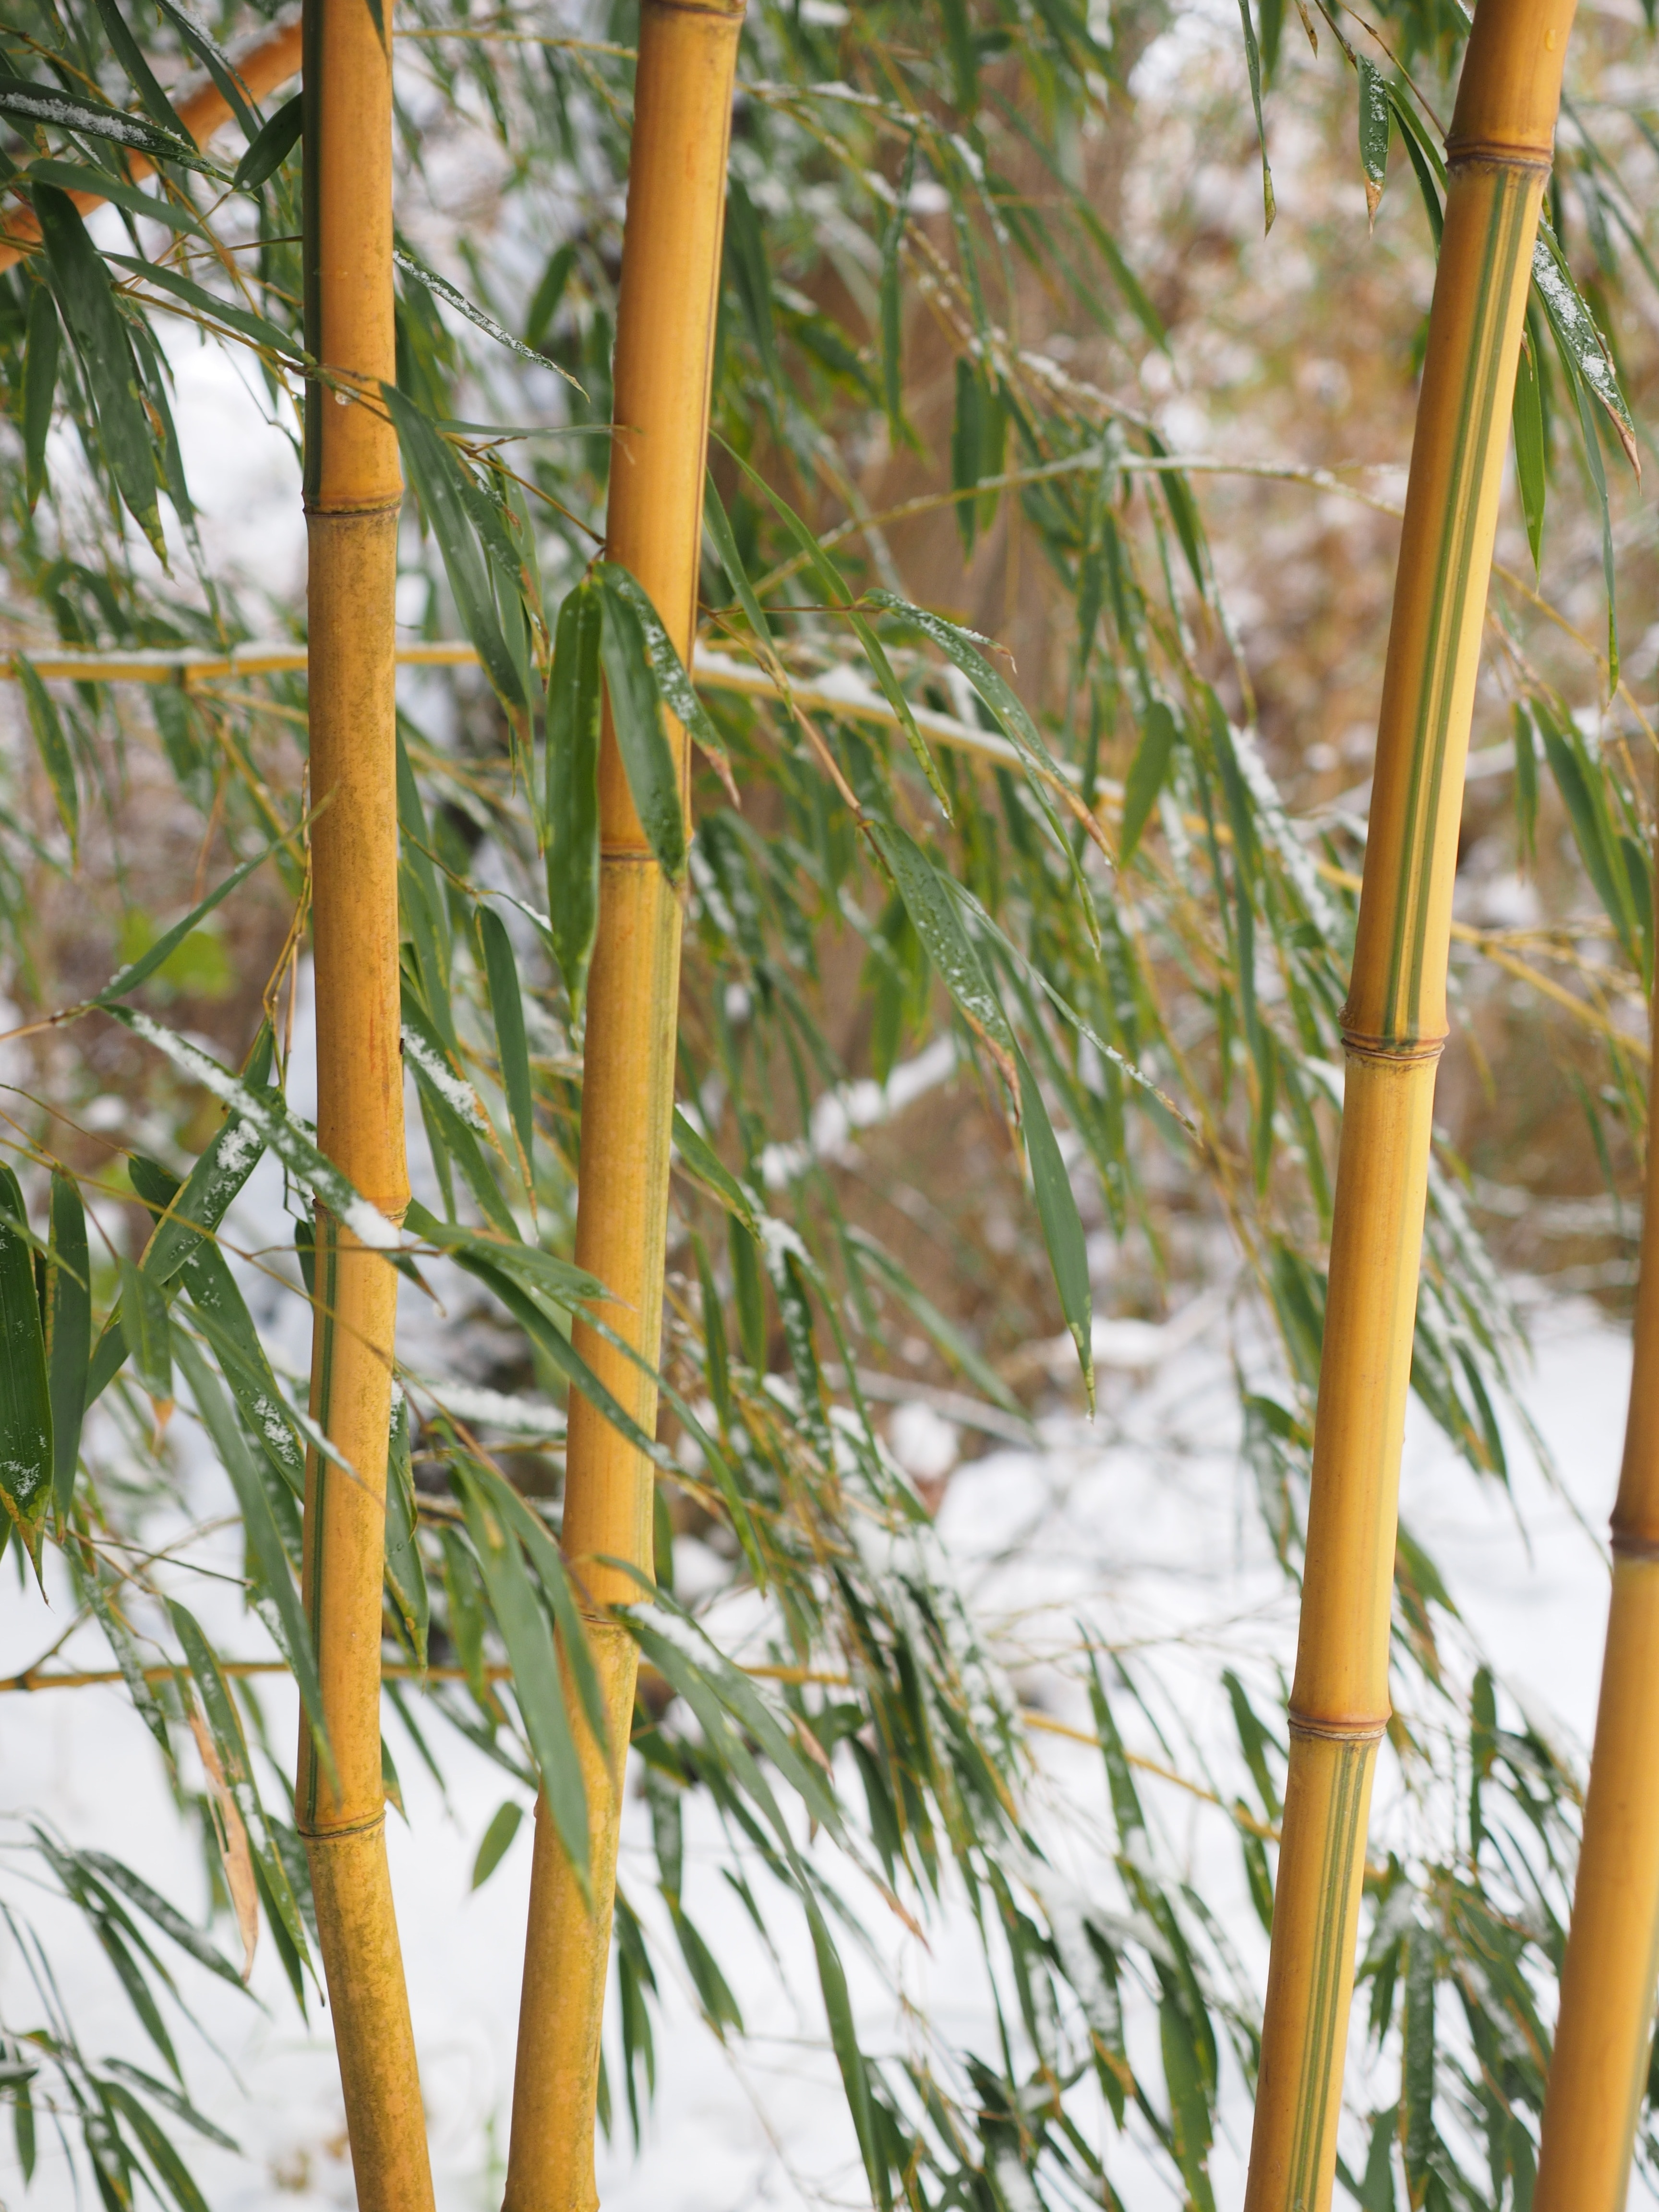 Plant, Tube, Winter, Snow, Bamboo, green color, day